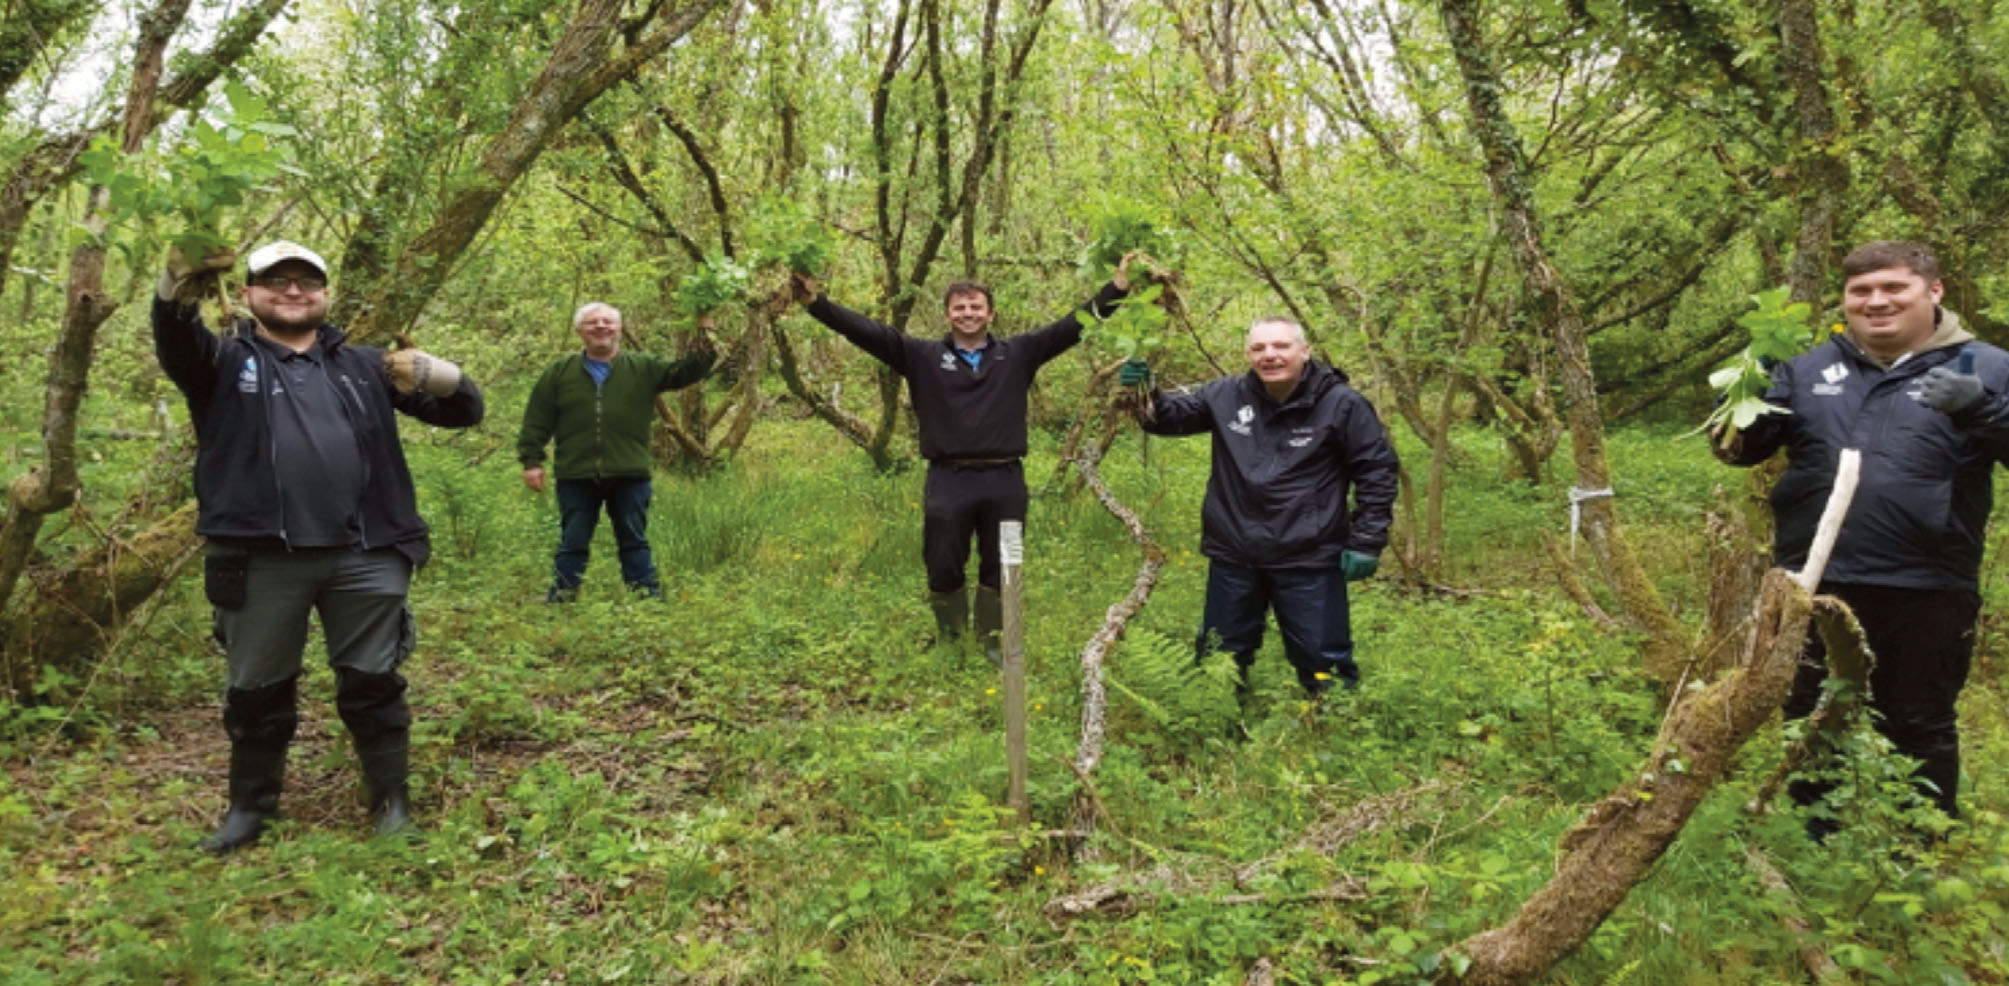 5 men standing around a wooden post in a wood holding Himalyan balsam plants they have removed. Taken May 2021 in Chapel Hill Wood, Castlemartin Corse, Pembrokeshire, Wales, UK